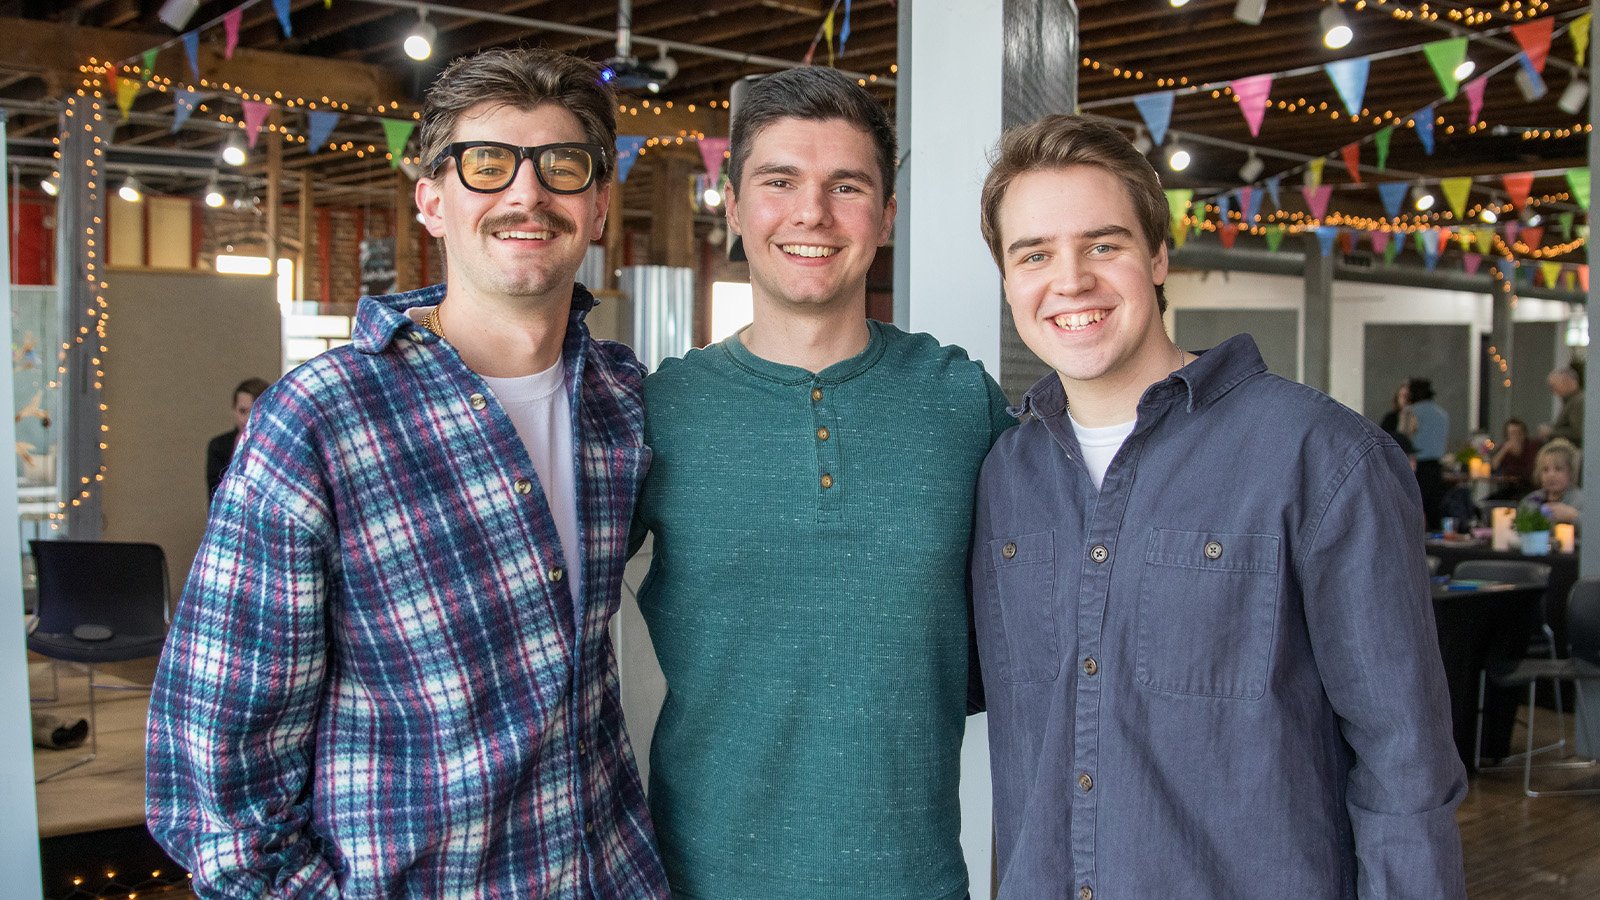 Three young men pose for a picture. Each has brown hair. The one on the left is wearing glasses and a plaid shirt. The one in the middle wears a green henley shirt, and the one on the right wears a navy blue long-sleeve shirt.